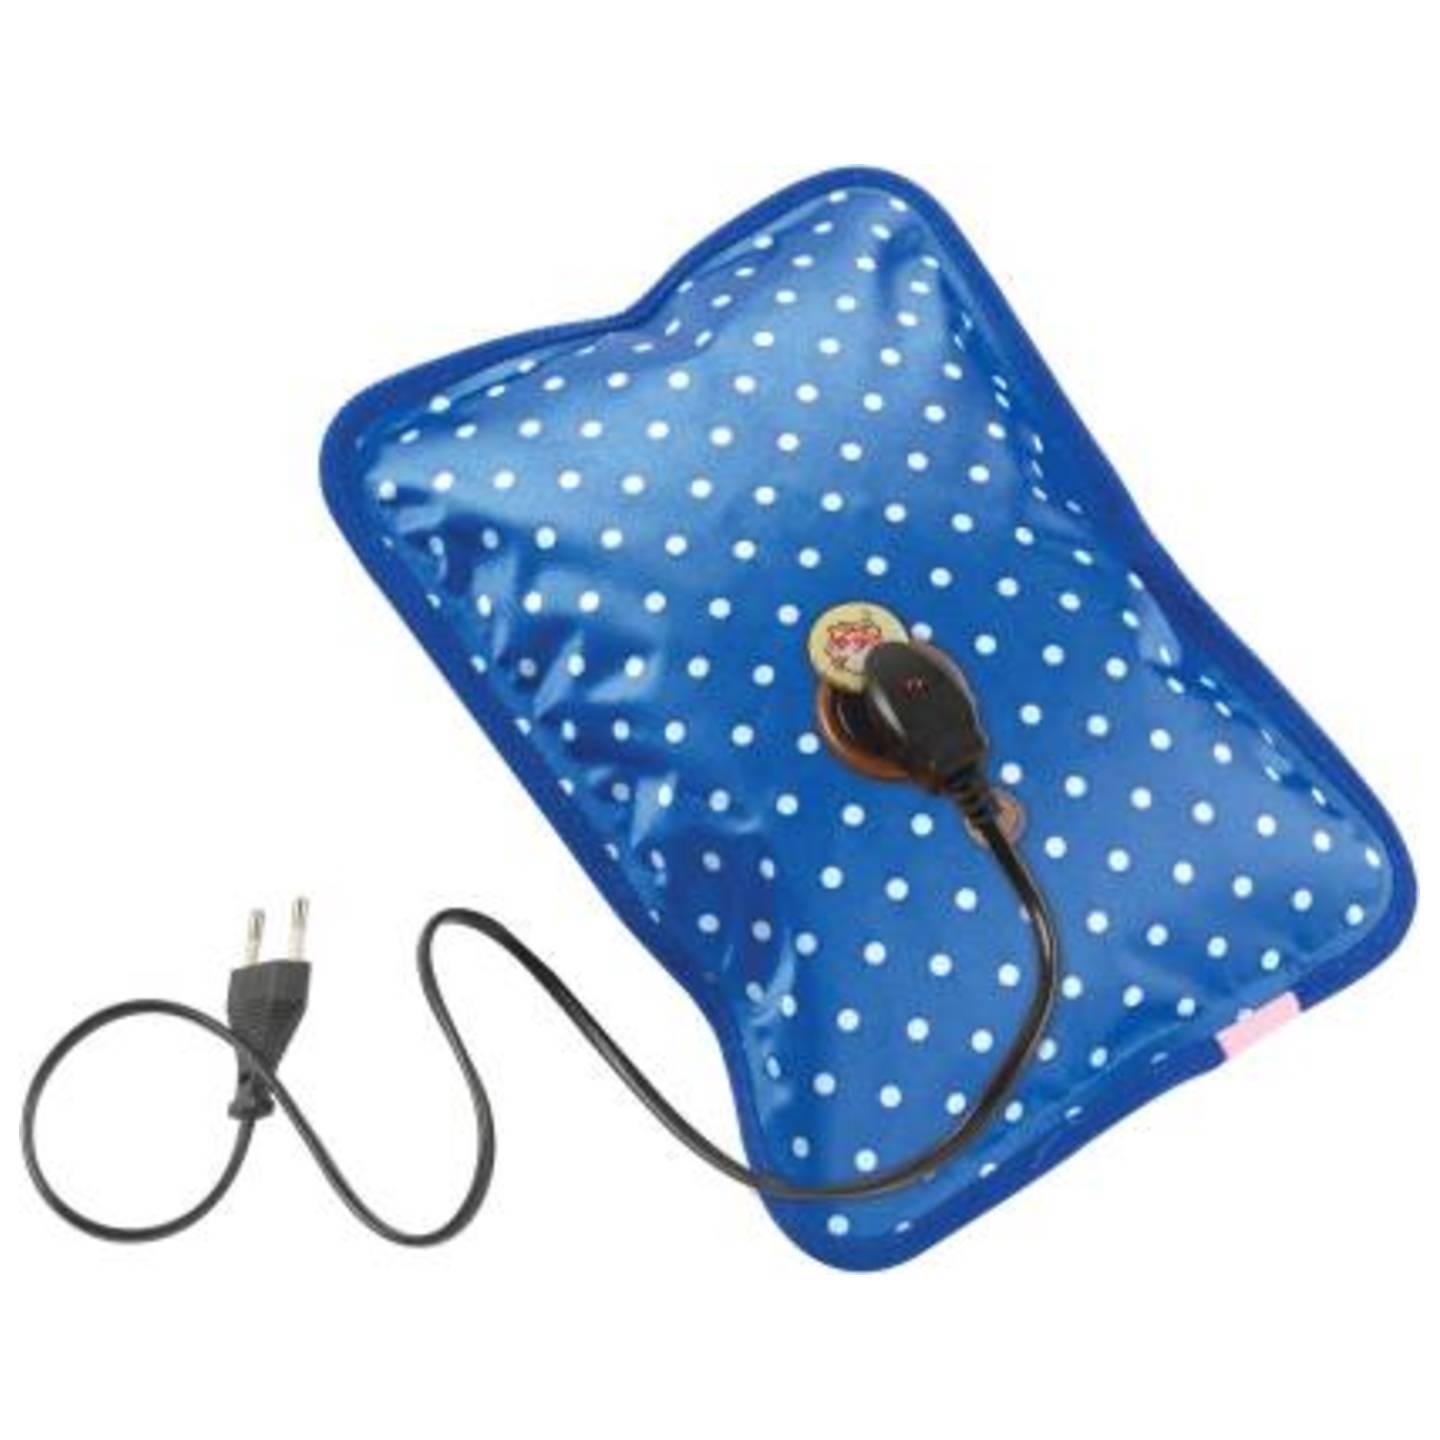 Heating Gel Pad for Pain Relief